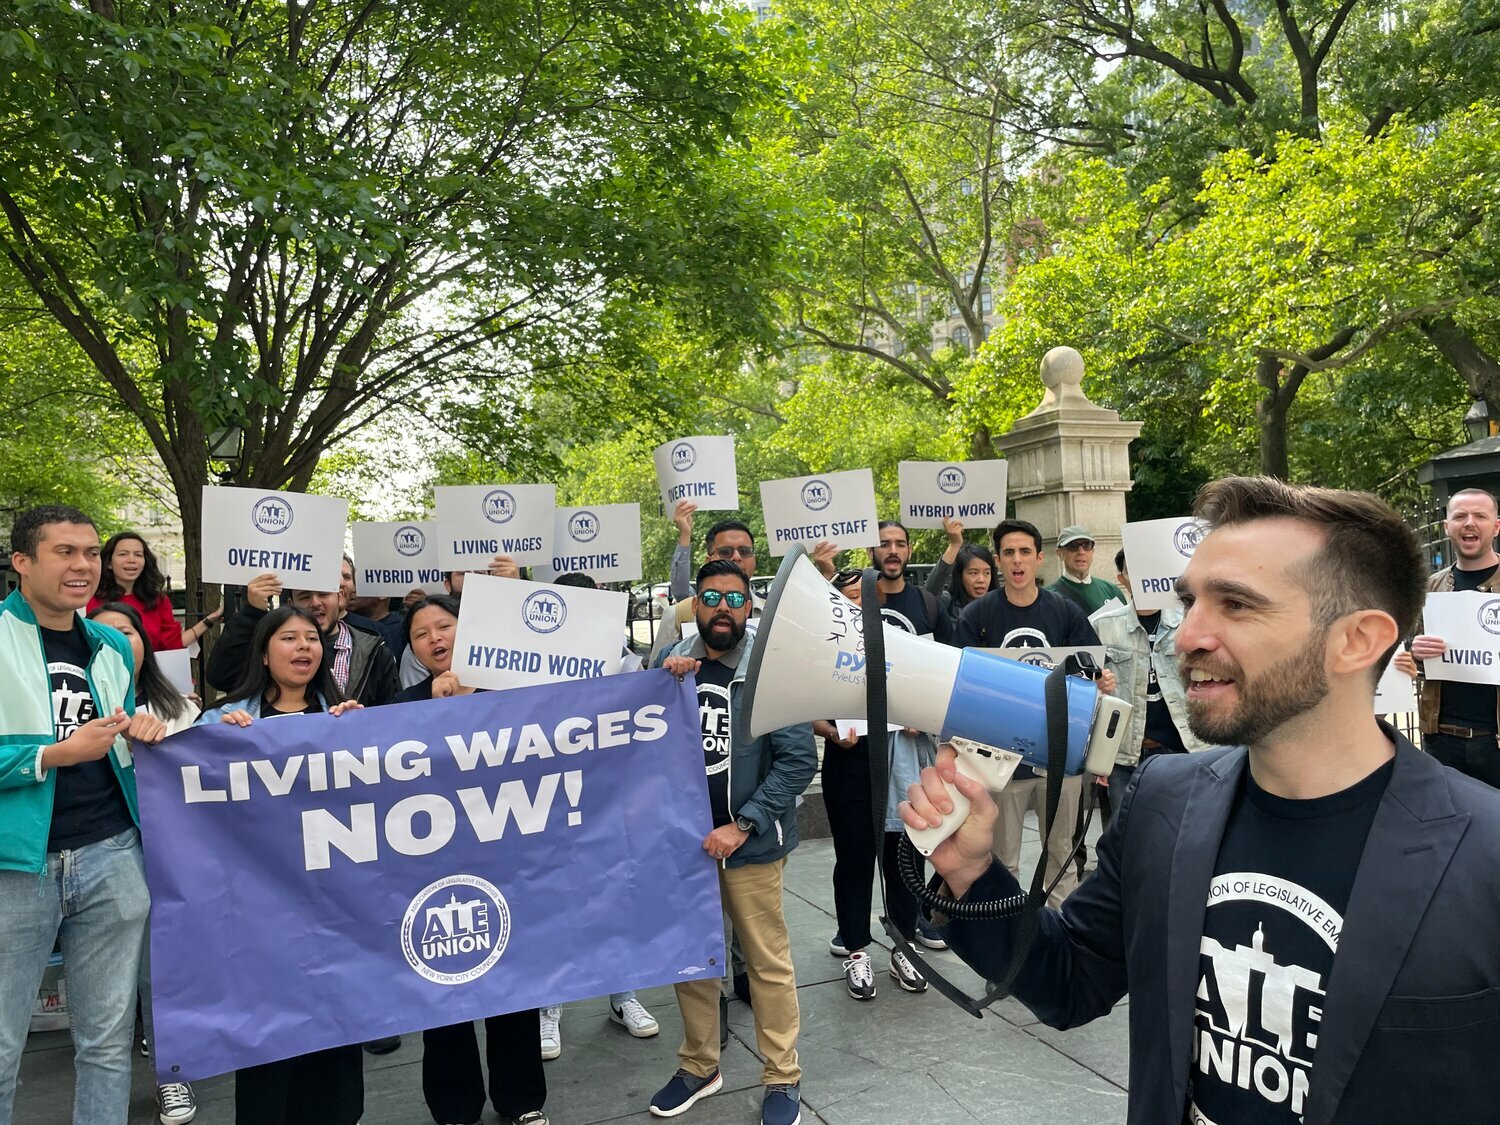 Members of the Association of Legislative Employees, including the union’s president, Dan Kroop, rallied outside City Hall last May to call attention to negotiations on a first contract with their City Council bosses. Kropp on Monday said the two sides are nearing an agreement.